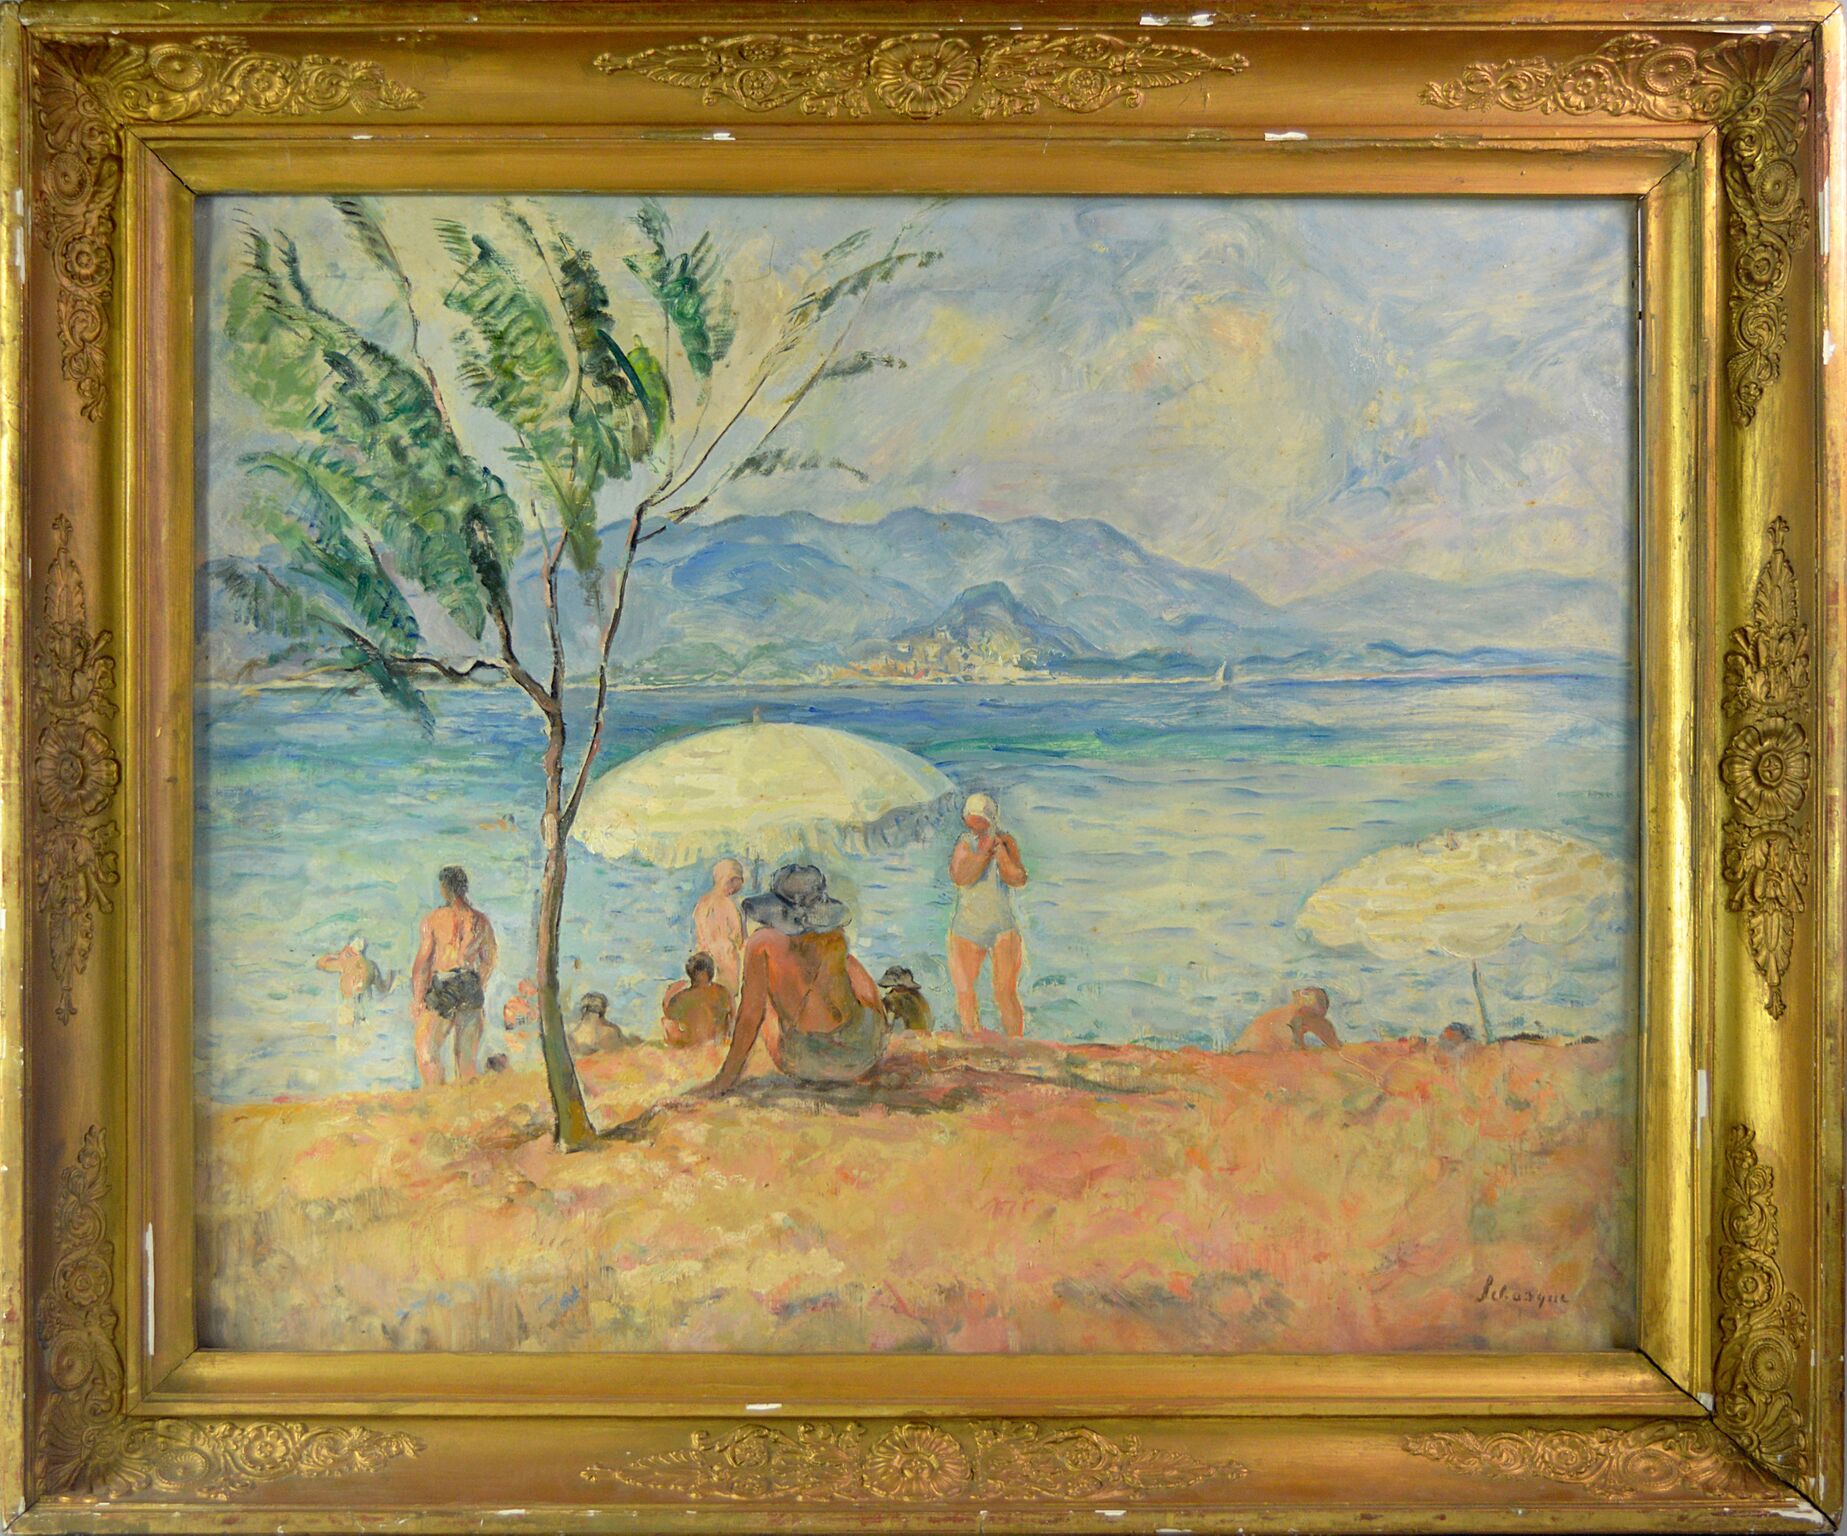 20th century French paintings starring in Roseberys auction Sept. 8